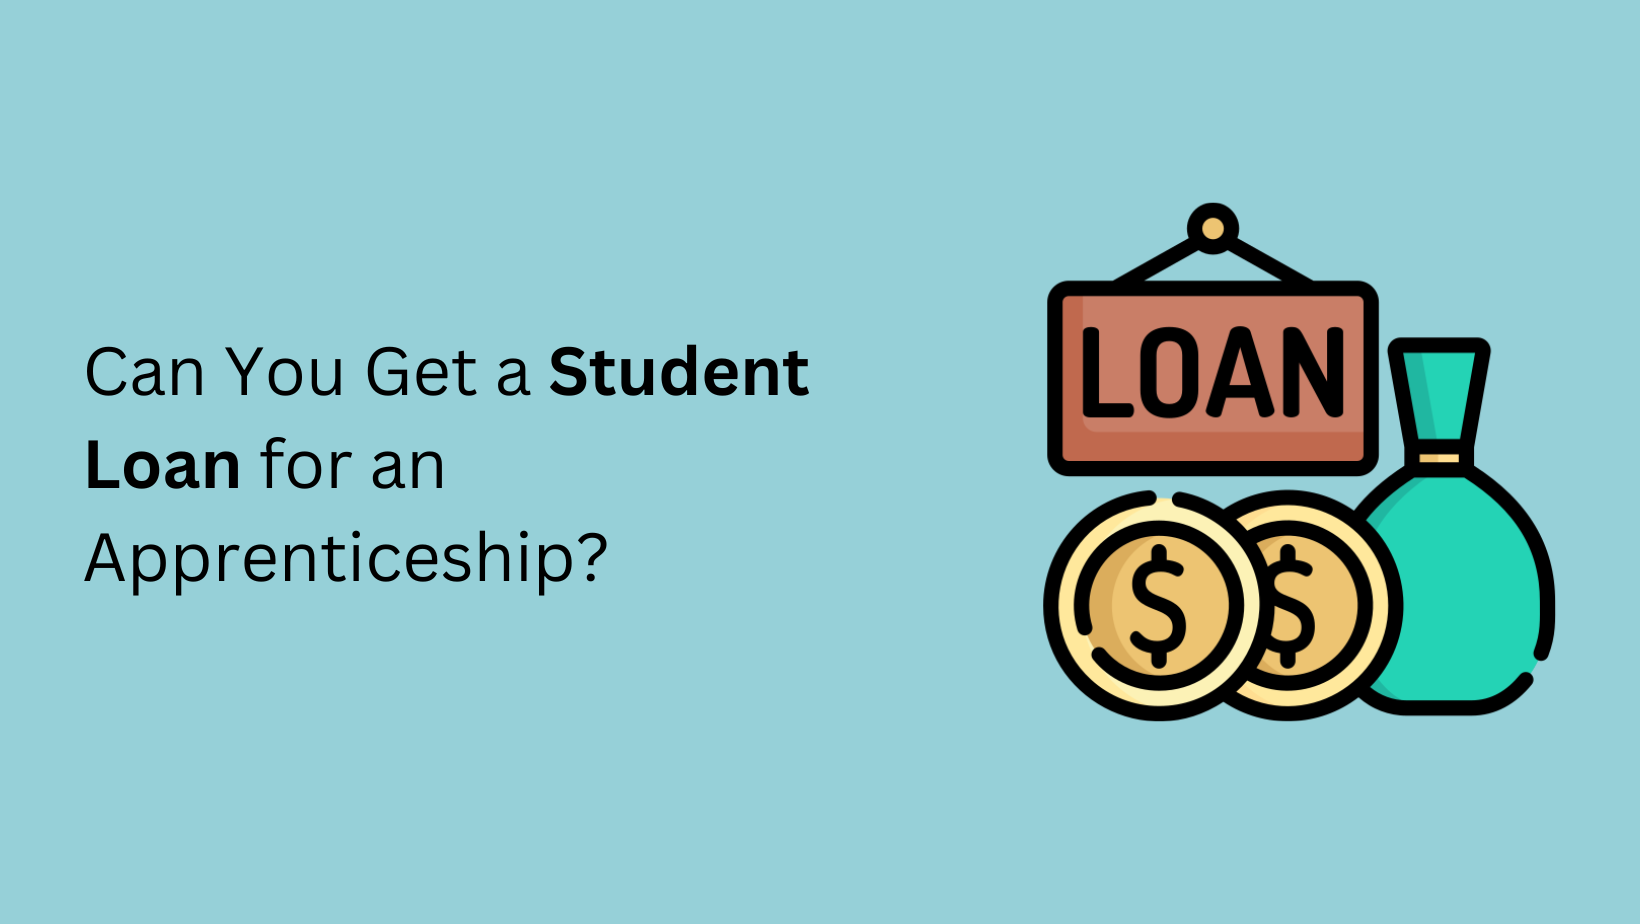 Can You Get a Student Loan for an Apprenticeship